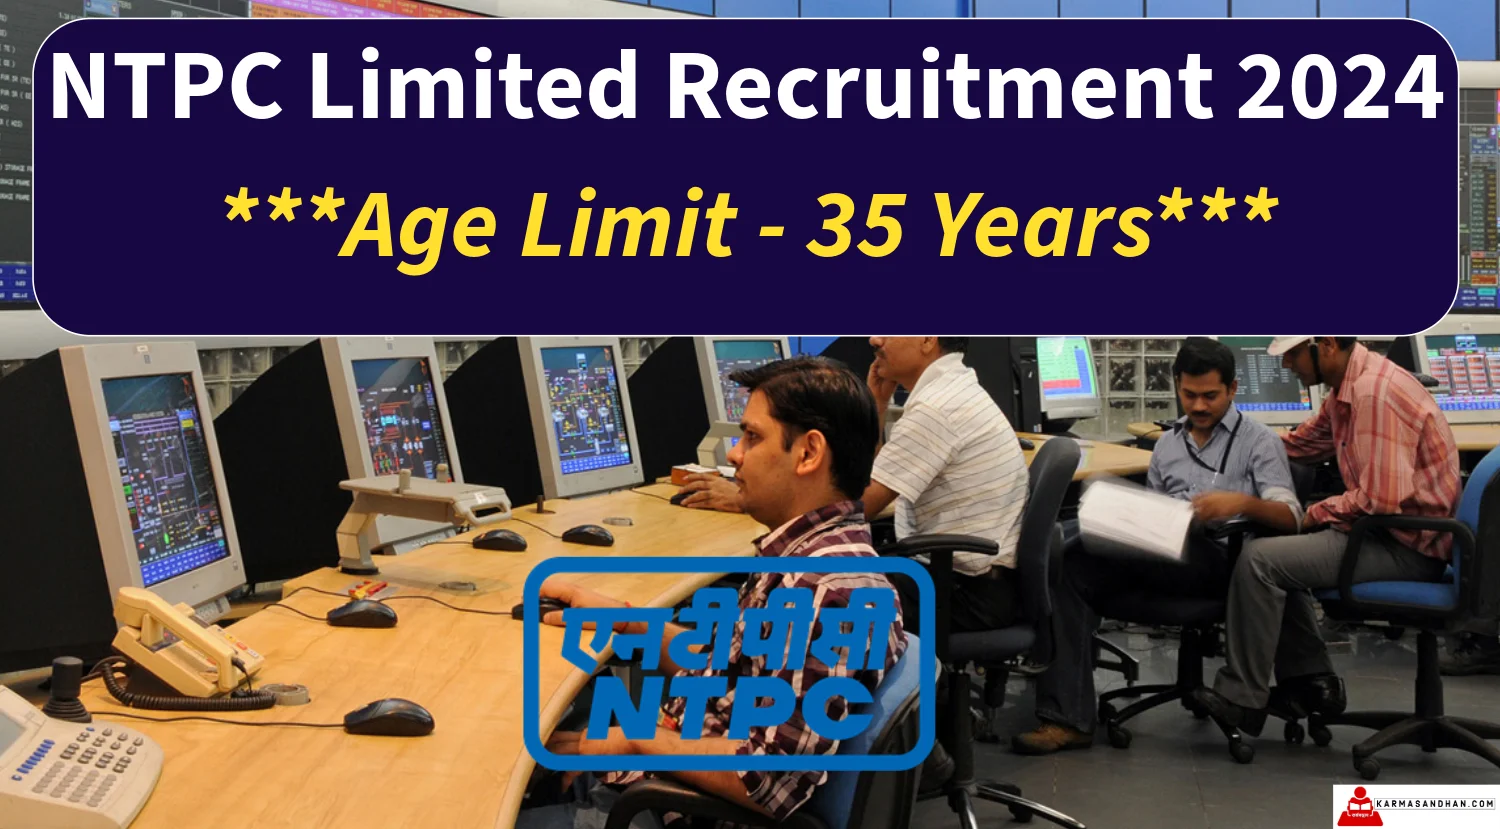 NTPC Limited Recruitment 2024 Notification out